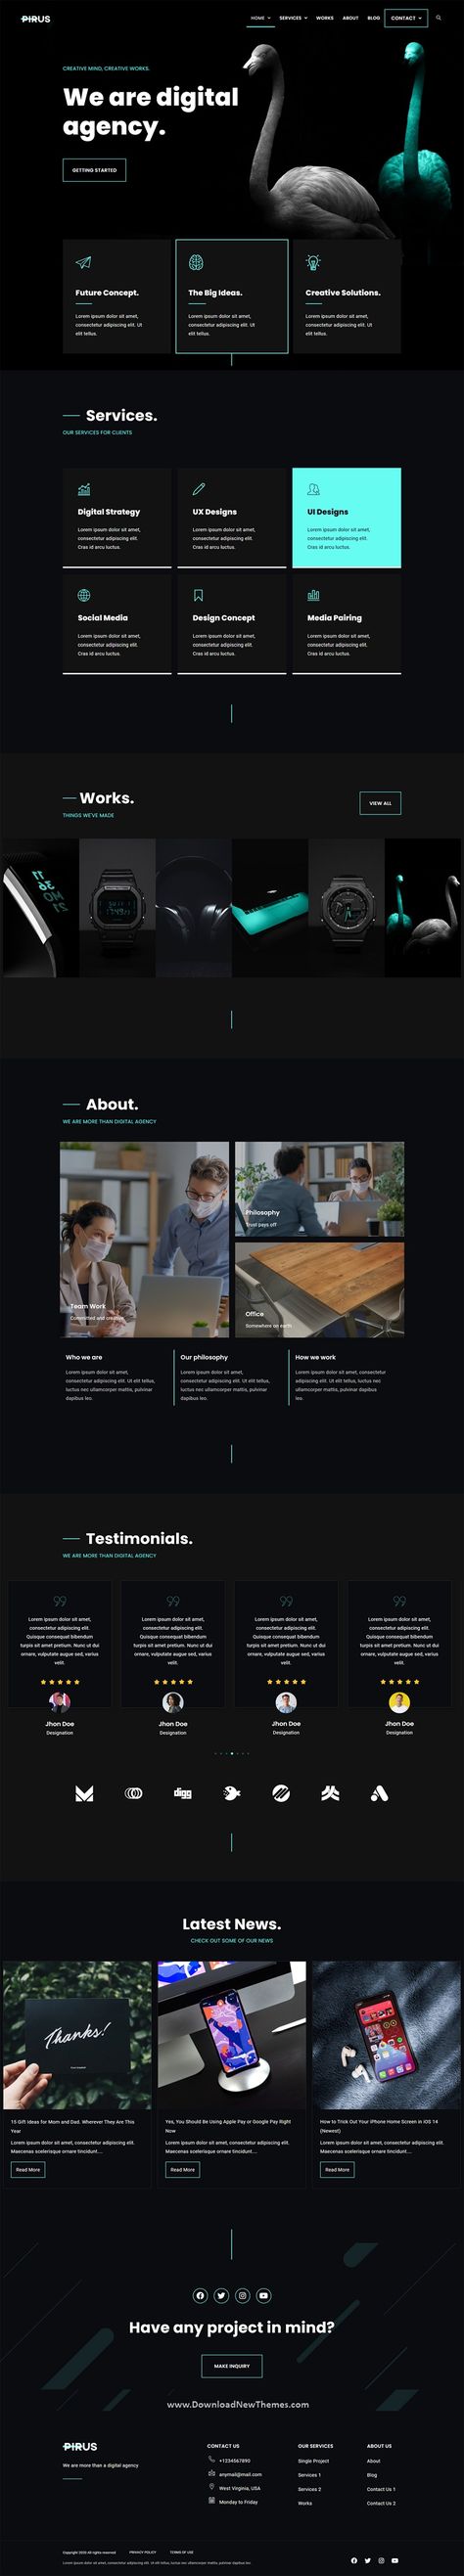 PIRUS Dark Digital Agency Elementor Template Kit is a clean, elegant and modern dark design responsive premium elementor template kit for digital agency, designers, freelancers, individuals or companies portfolio showcase professional website. It has 2 ⁬niche homepage layouts, 15+ pre-designed pages and sections can be imported into your website on WordPress in just a few clicks using the free page builder Elementor to download now & live preview click on image 👆 Freelance Website Inspiration, Creative Agency Website Design Layout, It Website Design Inspiration, Cool Website Design Layout, It Services Website Design, How It Works Web Design, About Us Page Design Website, Dark Theme Website, Modern Web Design Inspiration